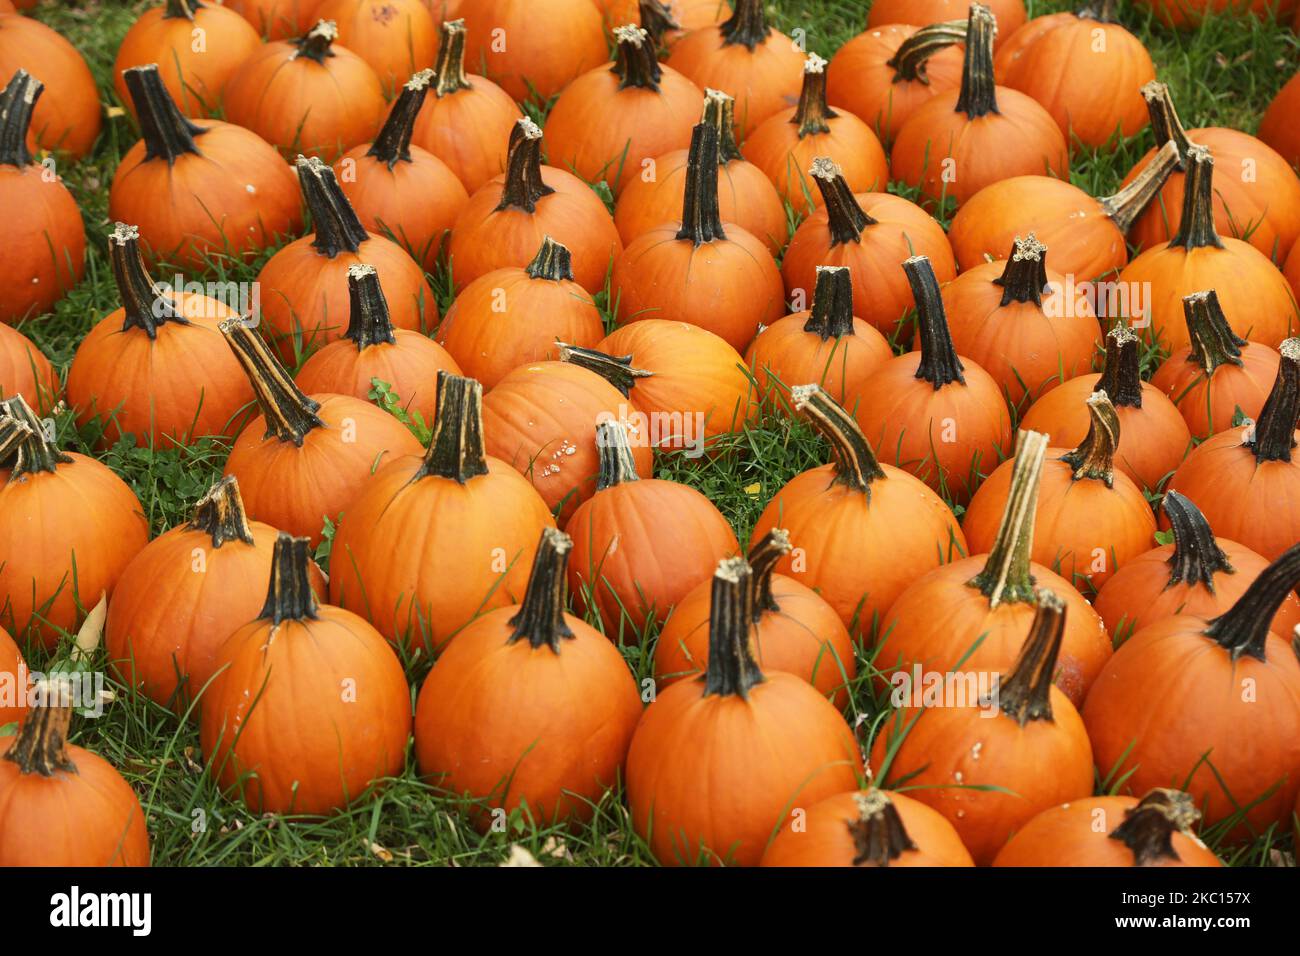 Small pumpkins at a farm during the novel coronavirus (COVID-19) pandemic in Markham, Ontario, Canada, on October 03, 2020. Cases of COVID-19 continue to rise, with record daily numbers across the Greater Toronto Area. Calls to place the city of Toronto back into lockdown to slow the spread of the virus are mounting from healthcare officials. (Photo by Creative Touch Imaging Ltd./NurPhoto) Stock Photo